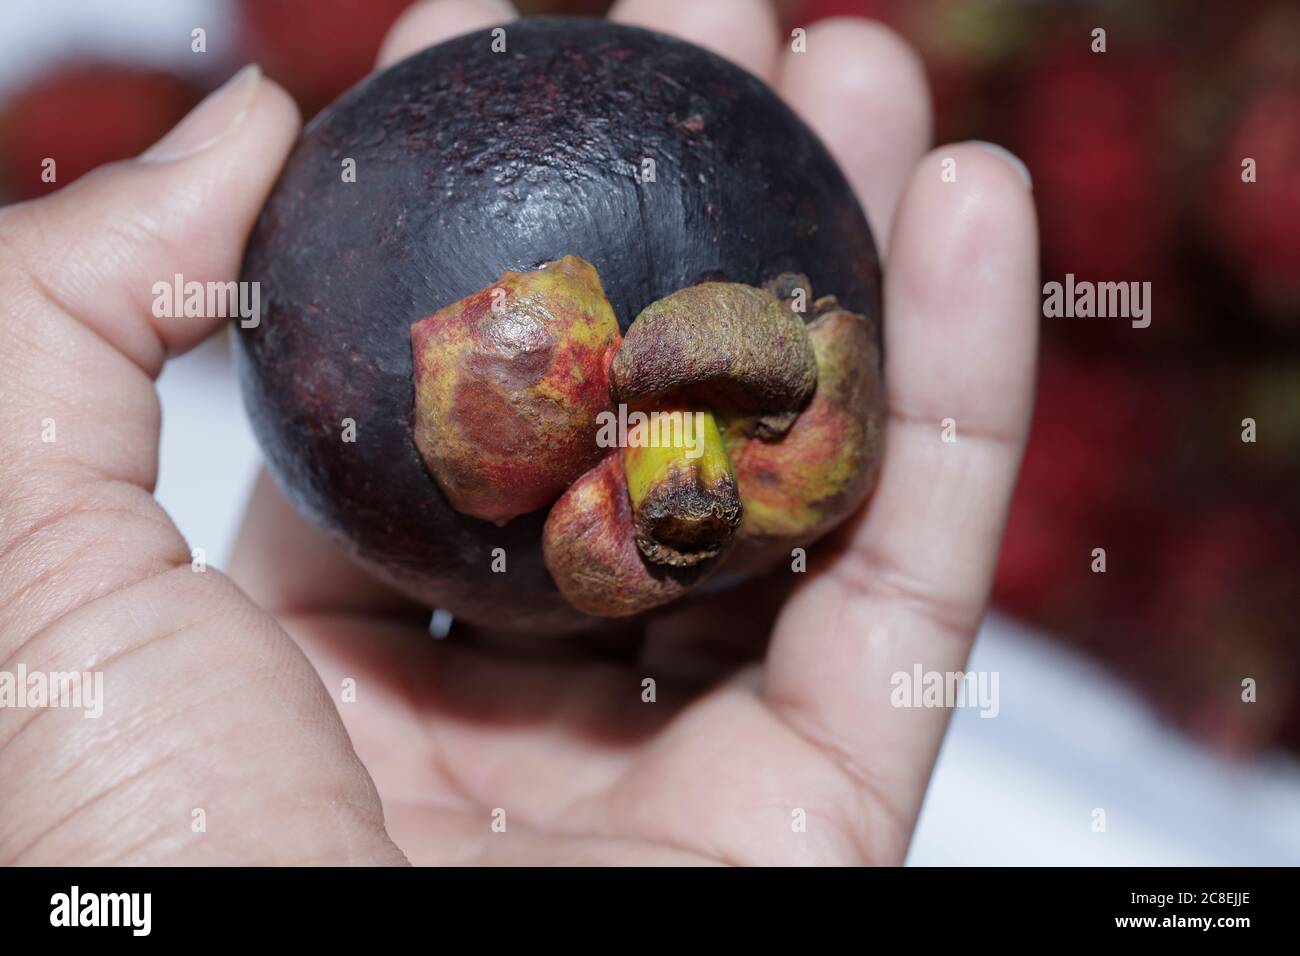 Mangosteen fruit is in the palm of hand Stock Photo